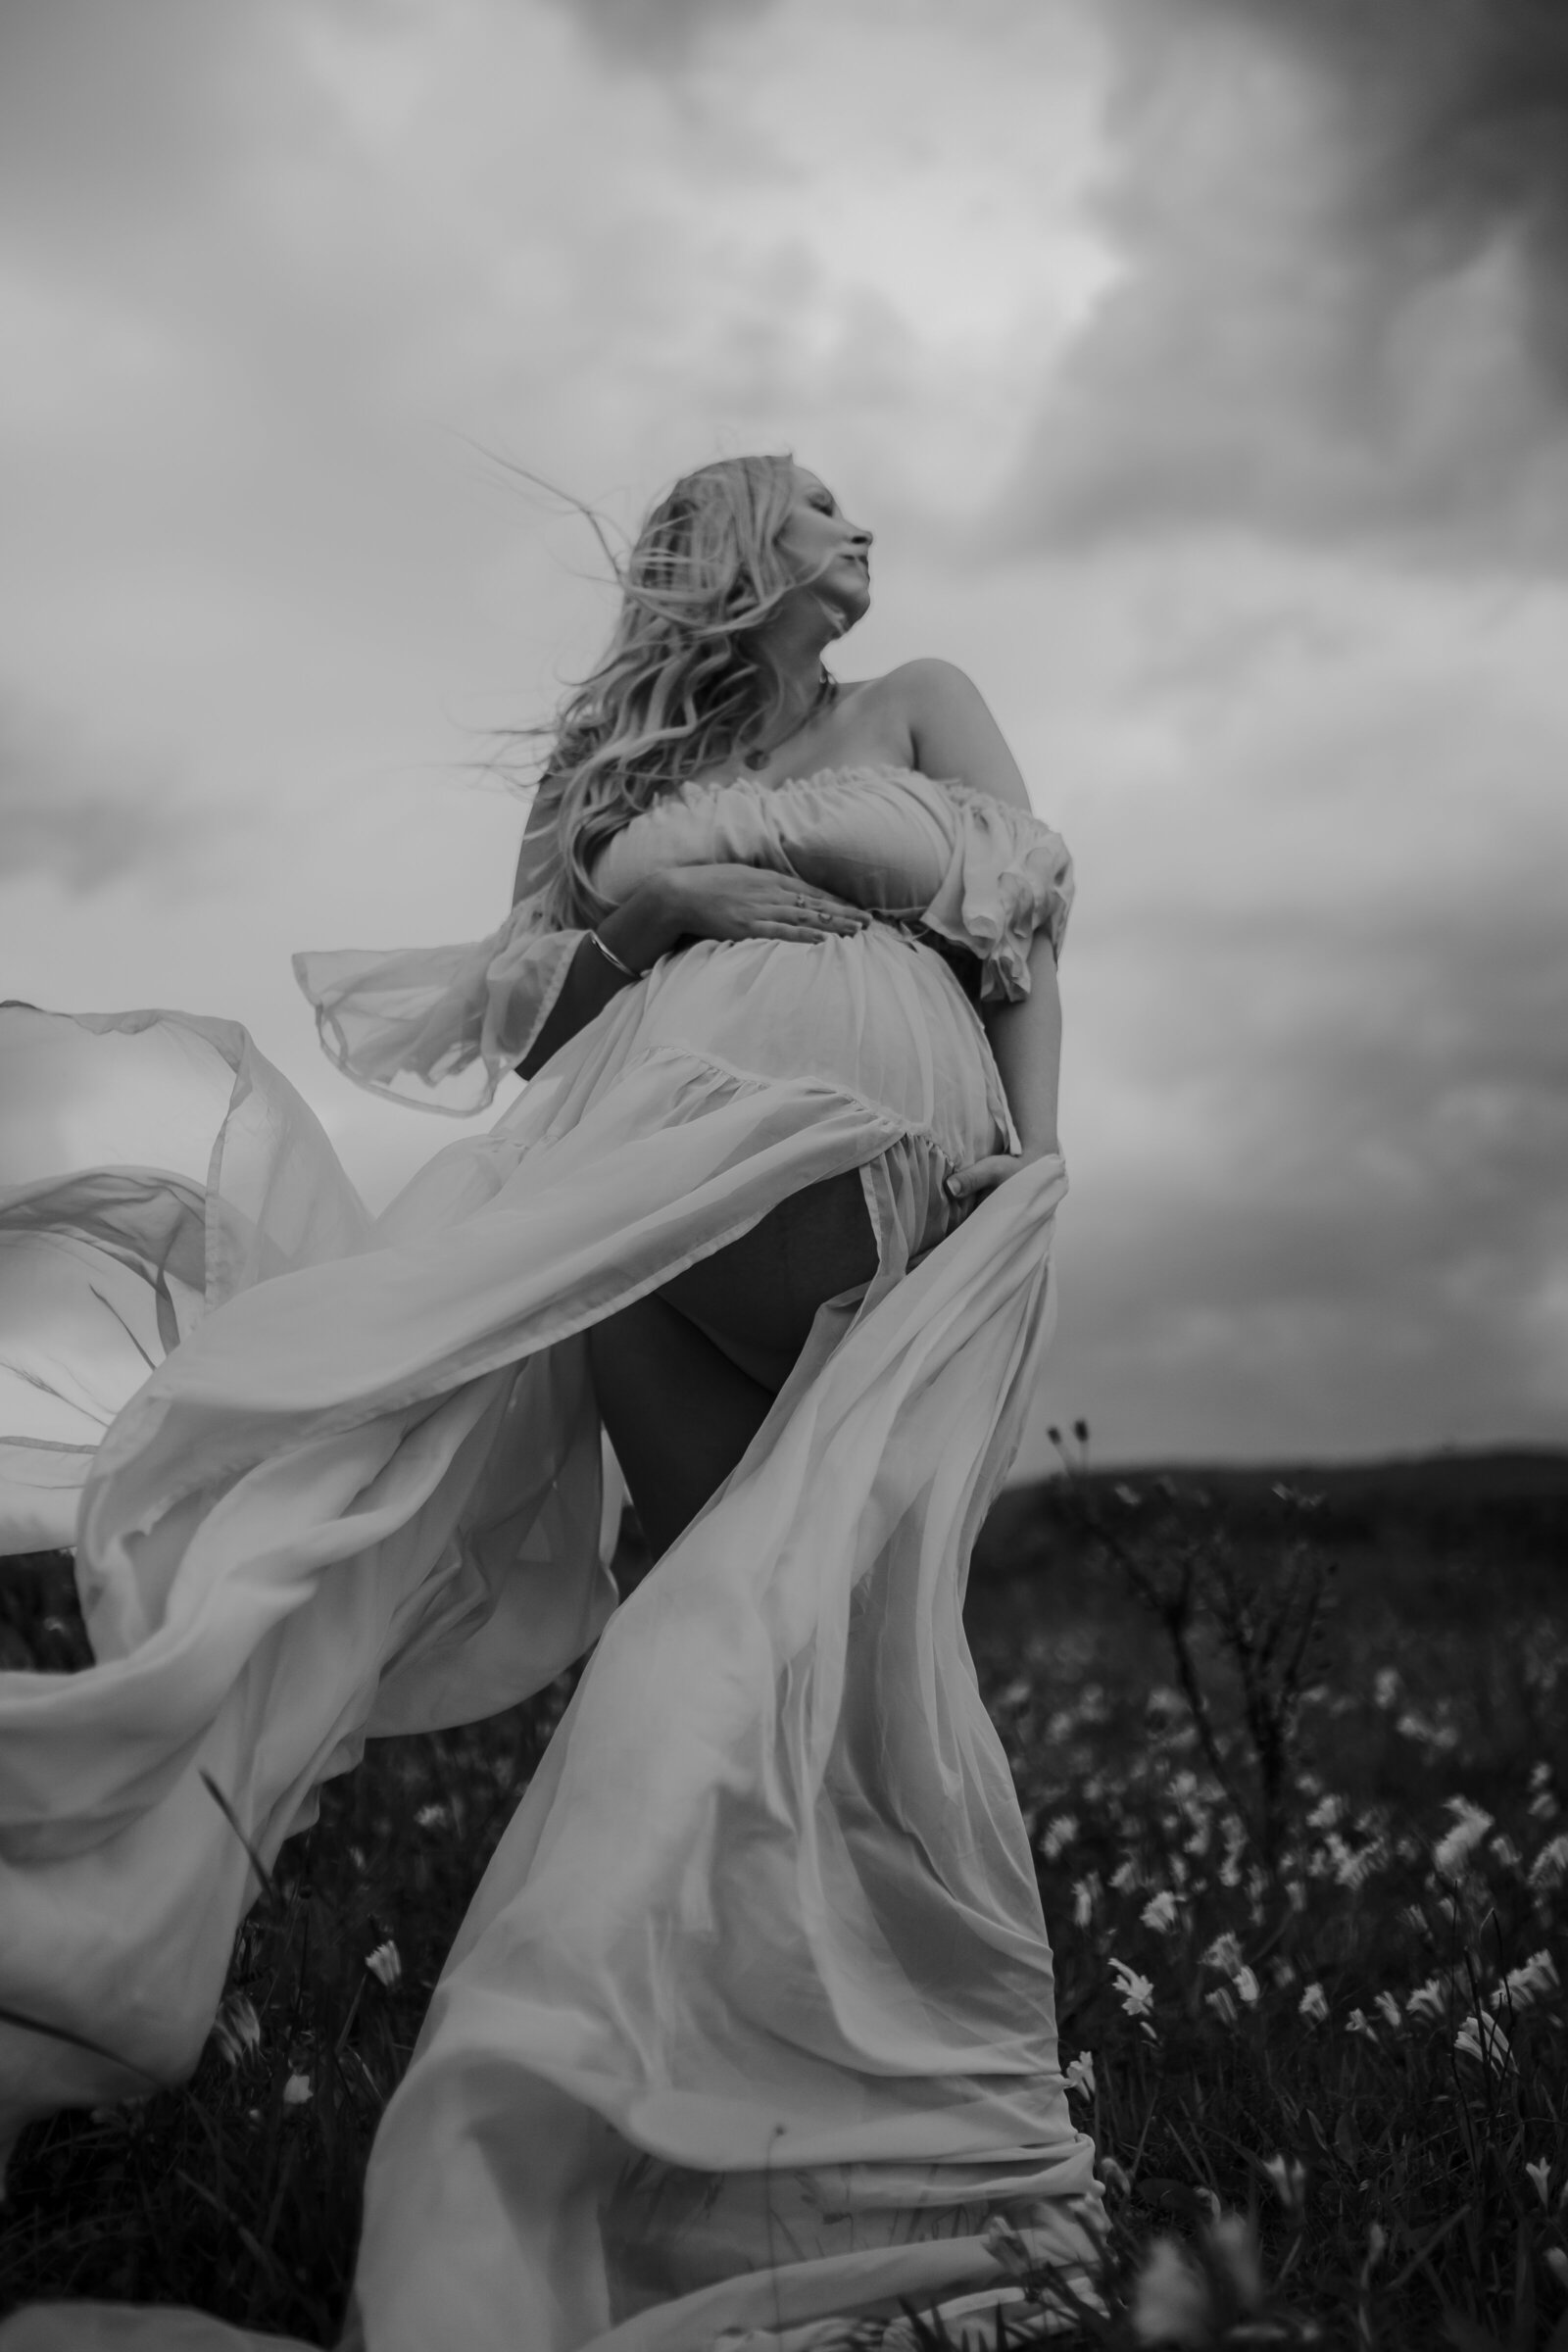 Black and white photo of a woman in a flowing dress standing in a field, looking upwards. The dress and her hair are being blown by the wind, and dark clouds loom in the sky above, evoking a sense of motherhood as she embraces the journey ahead.